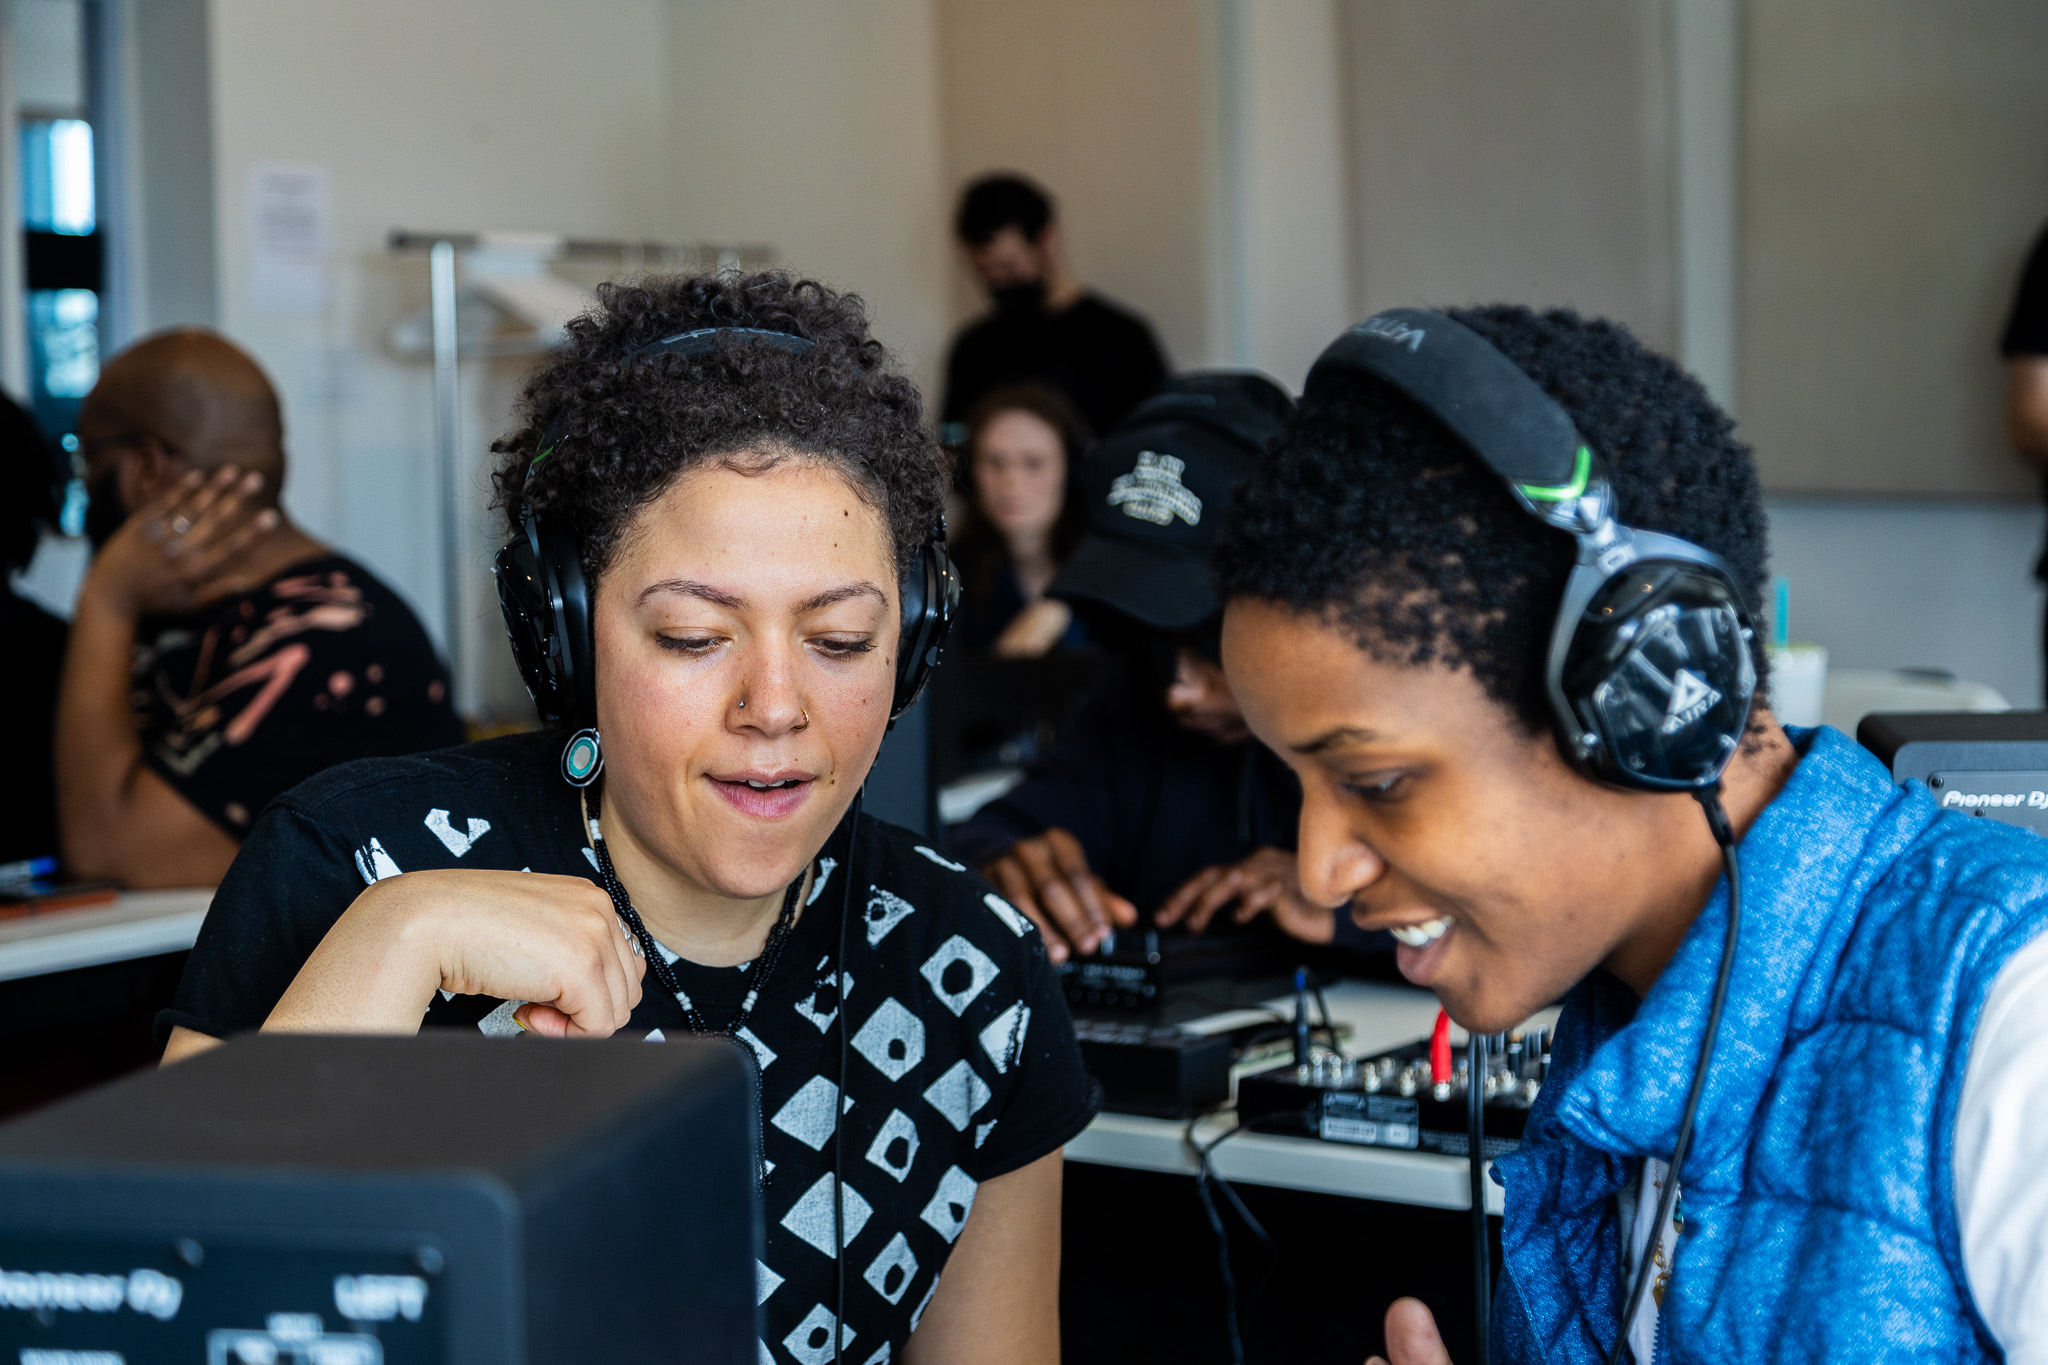 Two UMA students working together with headphones on.